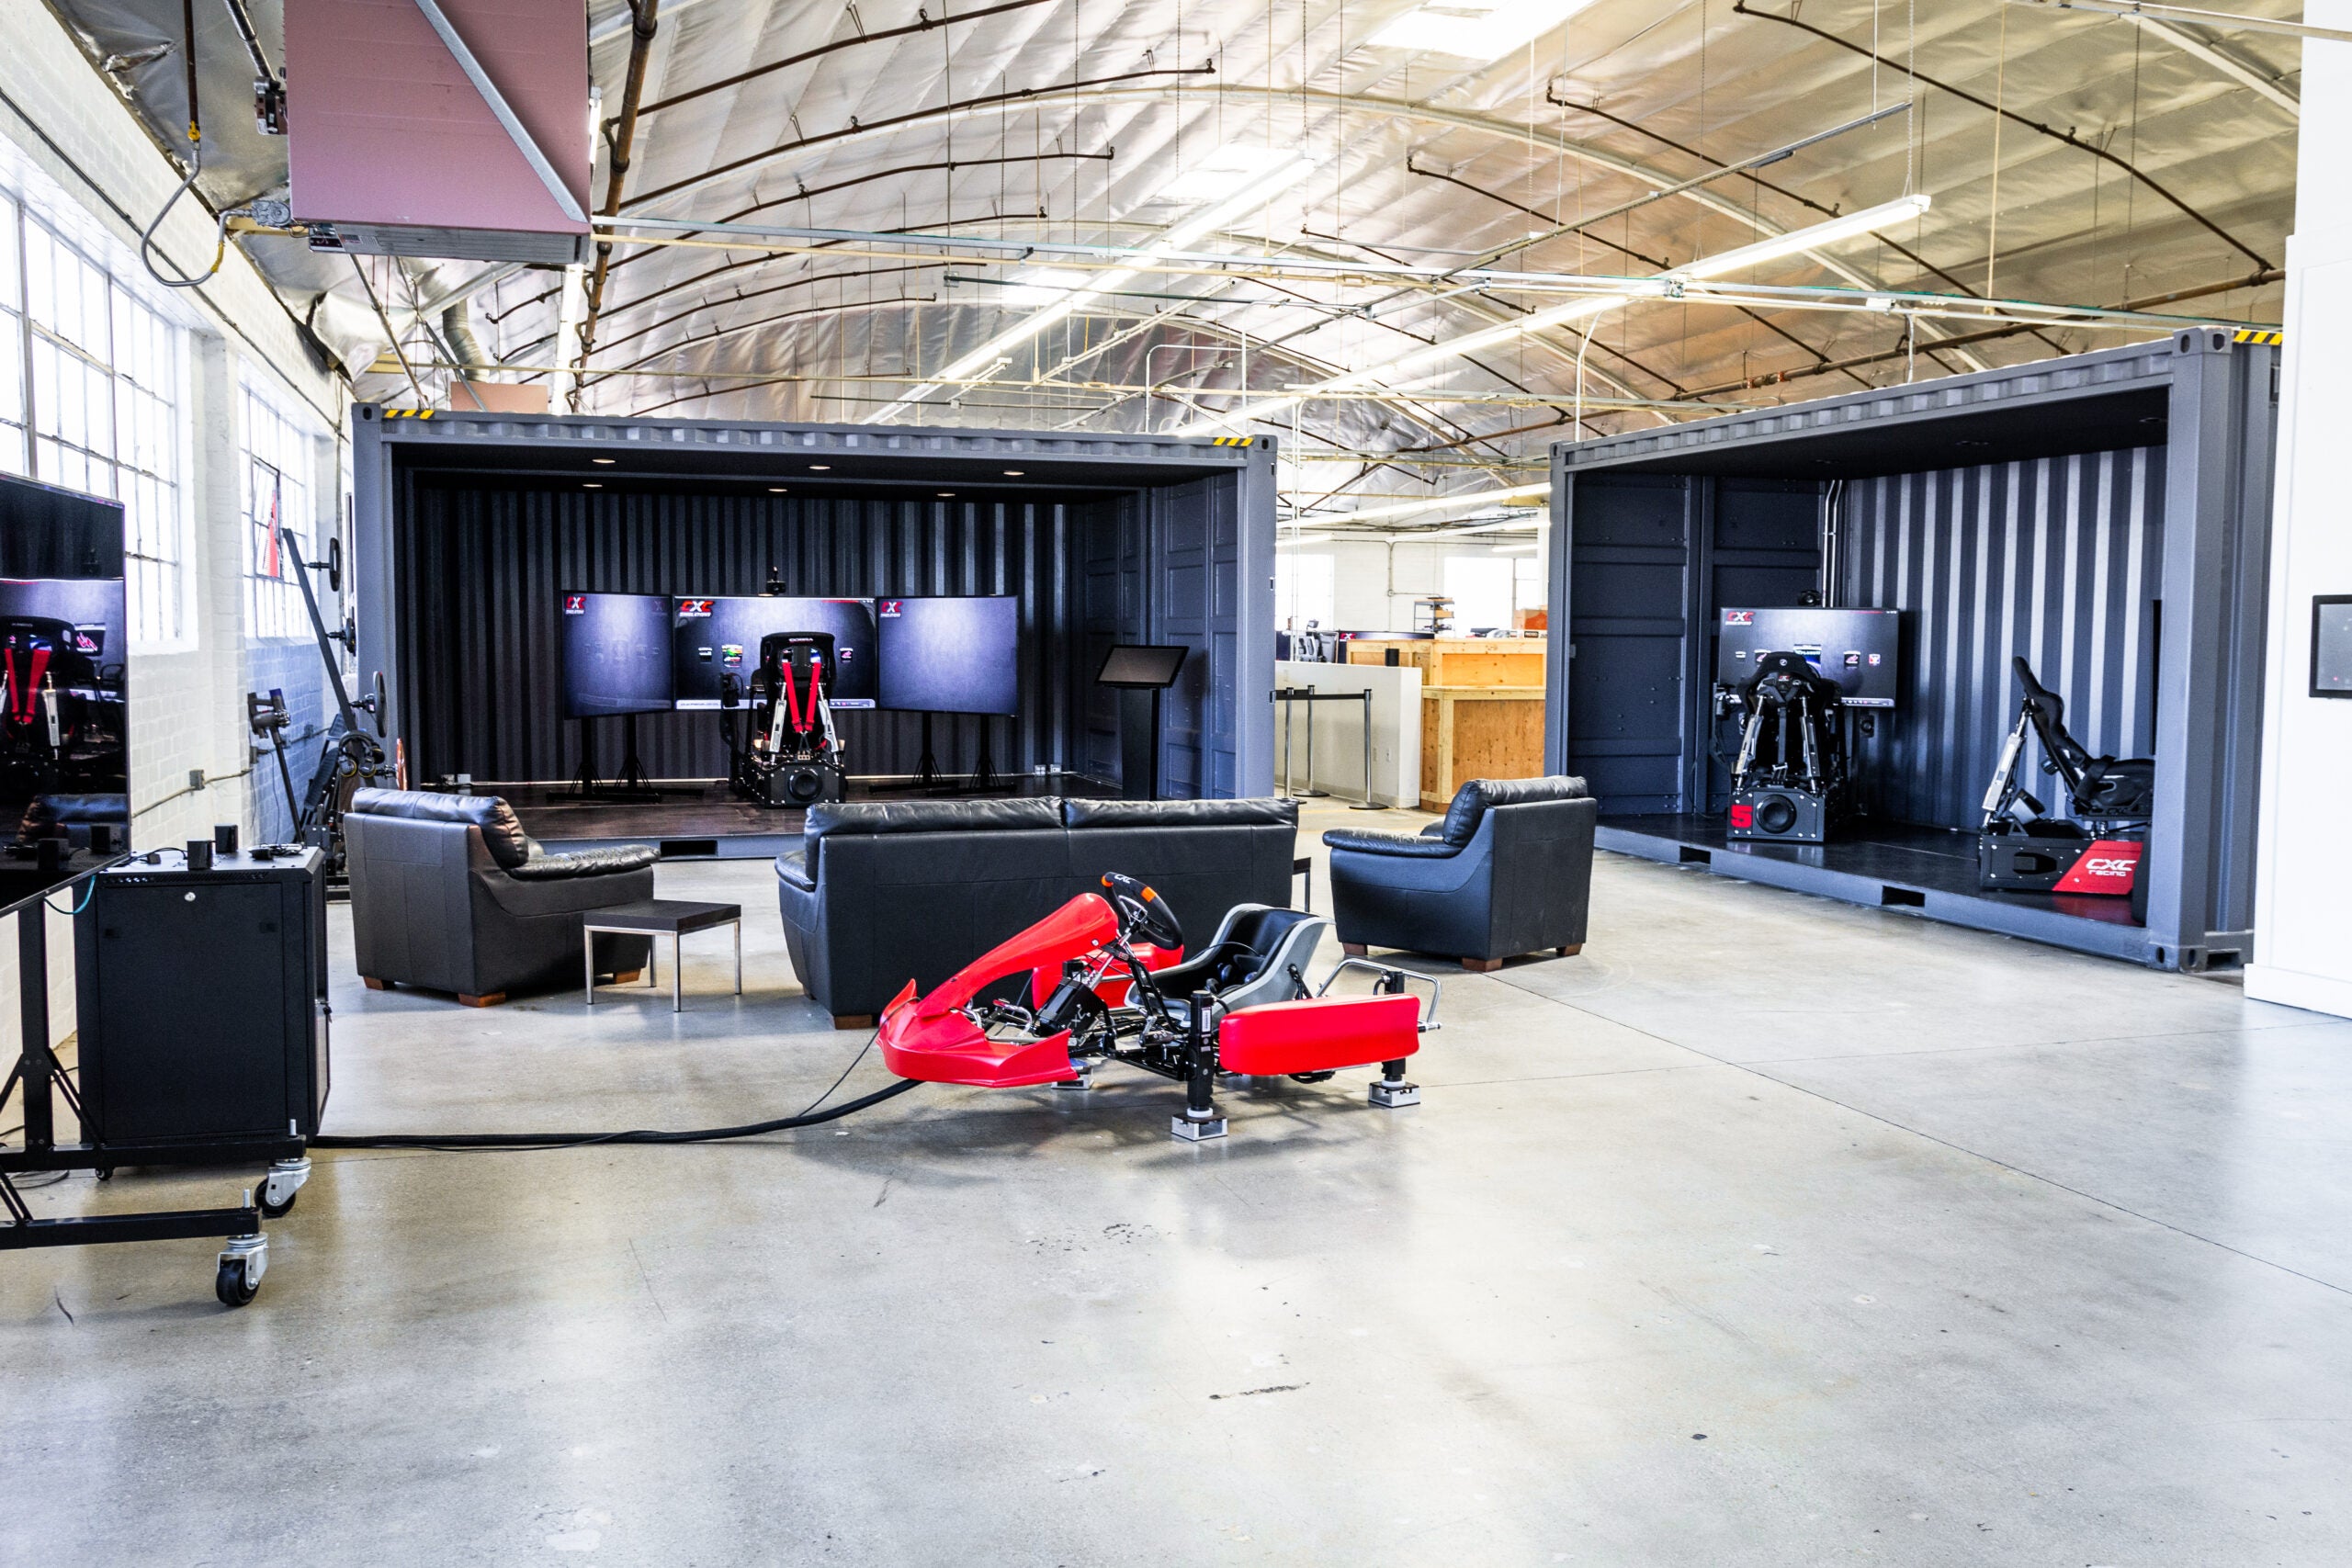 A brightly lit warehouse interior with two half opened intermodal containers within it. Inside of the containers are driving simulators. In the foreground, some couches and a kart make up the decor.